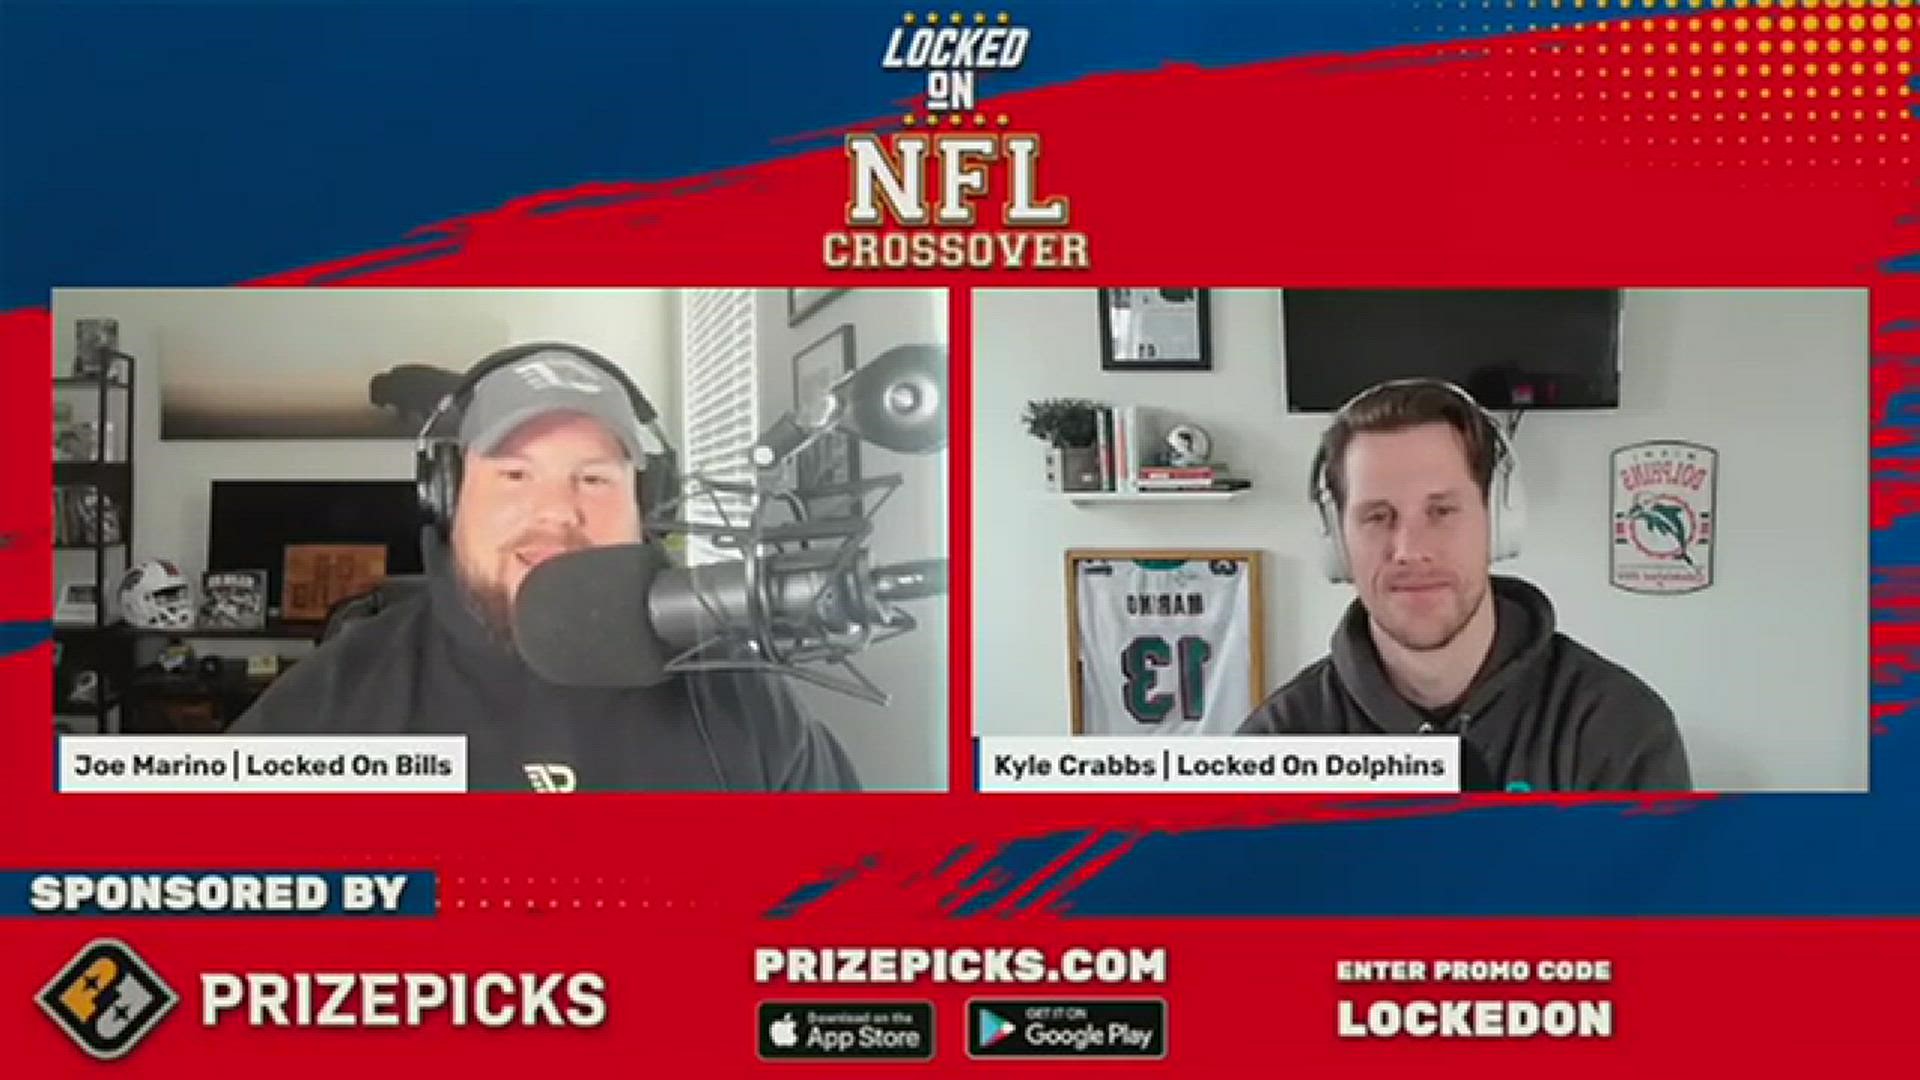 On today's podcast, Joe Marino is joined by Kyle Crabbs of Locked On Dolphins to breakdown the biggest matchups and storylines for Sunday and offer game predictions.